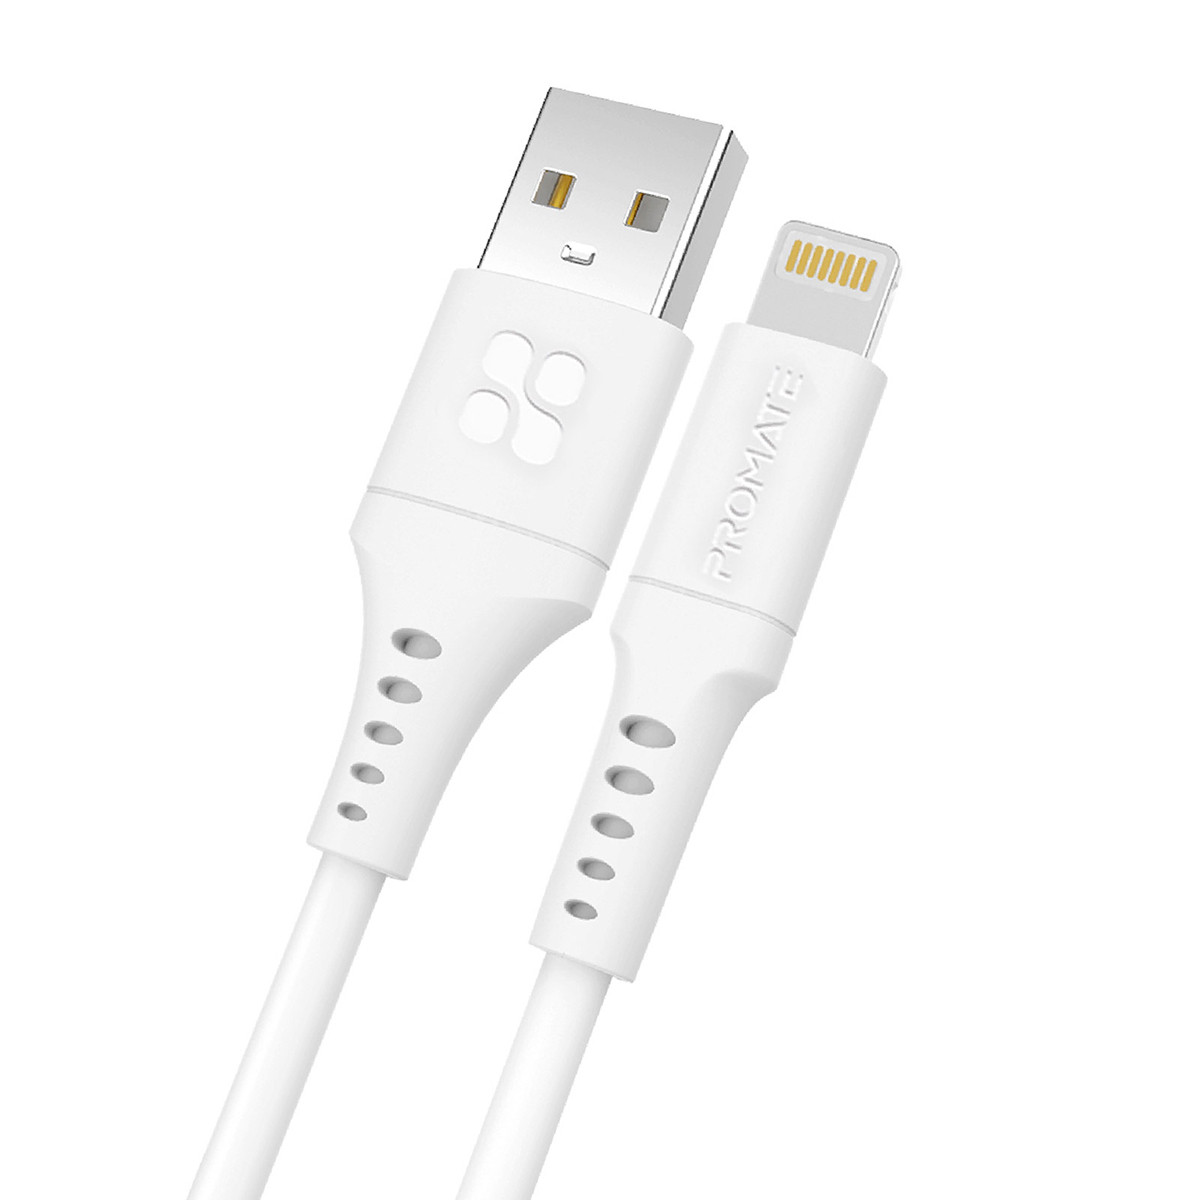 Promate USB-A to Lightning Cable with 2.4V Output, 480 Mbps Data Sync and 2m Cord, PowerLink-Ai200..White